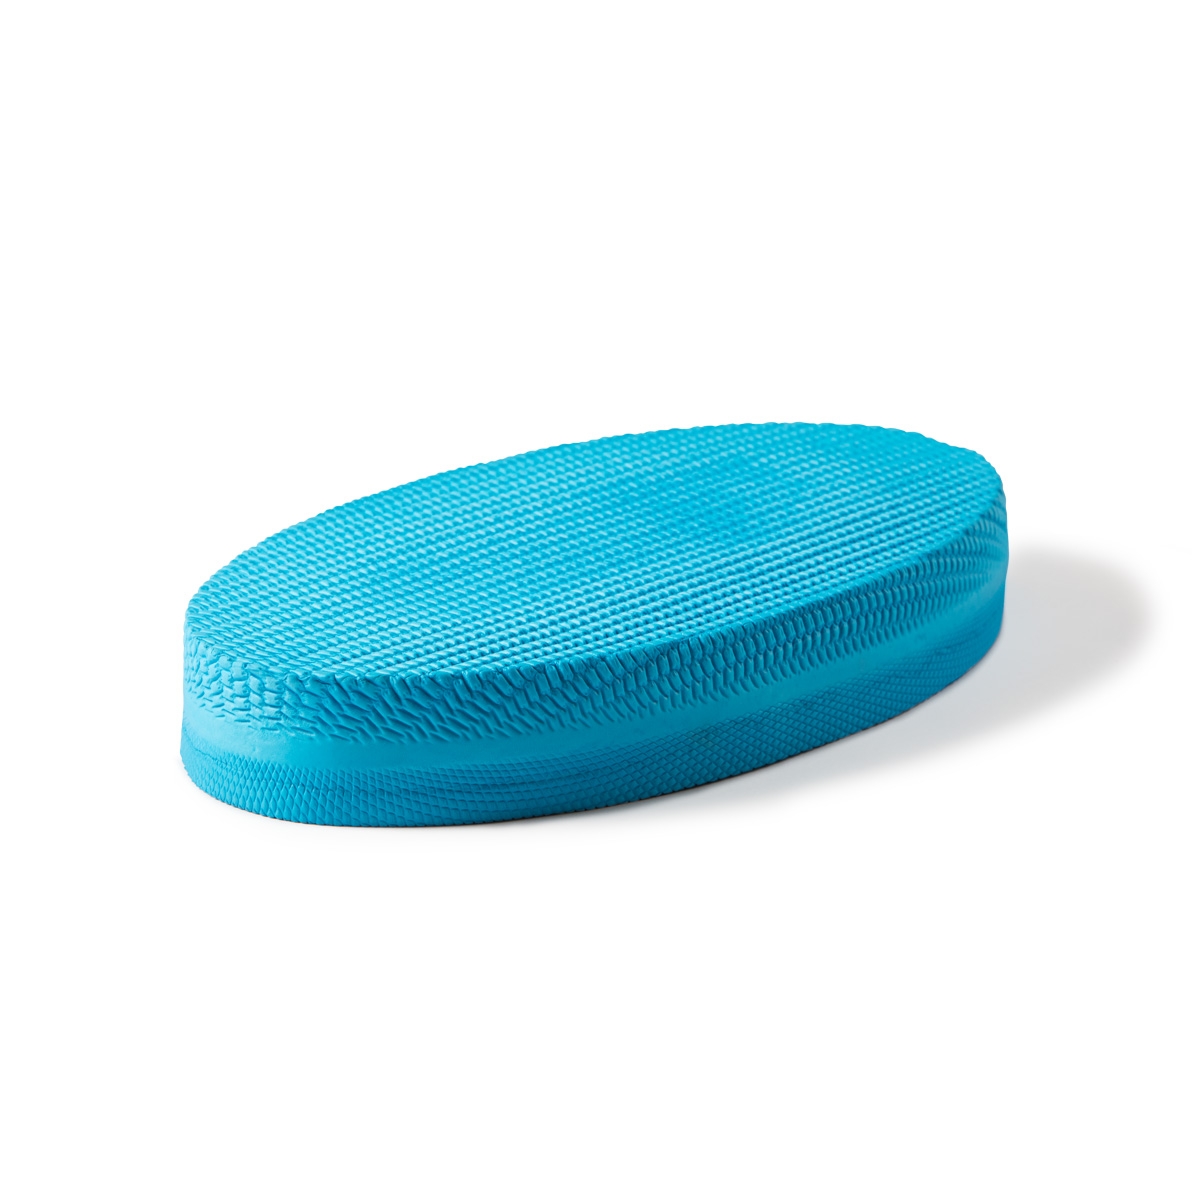 OPTP Stability Trainer, Balance Pads